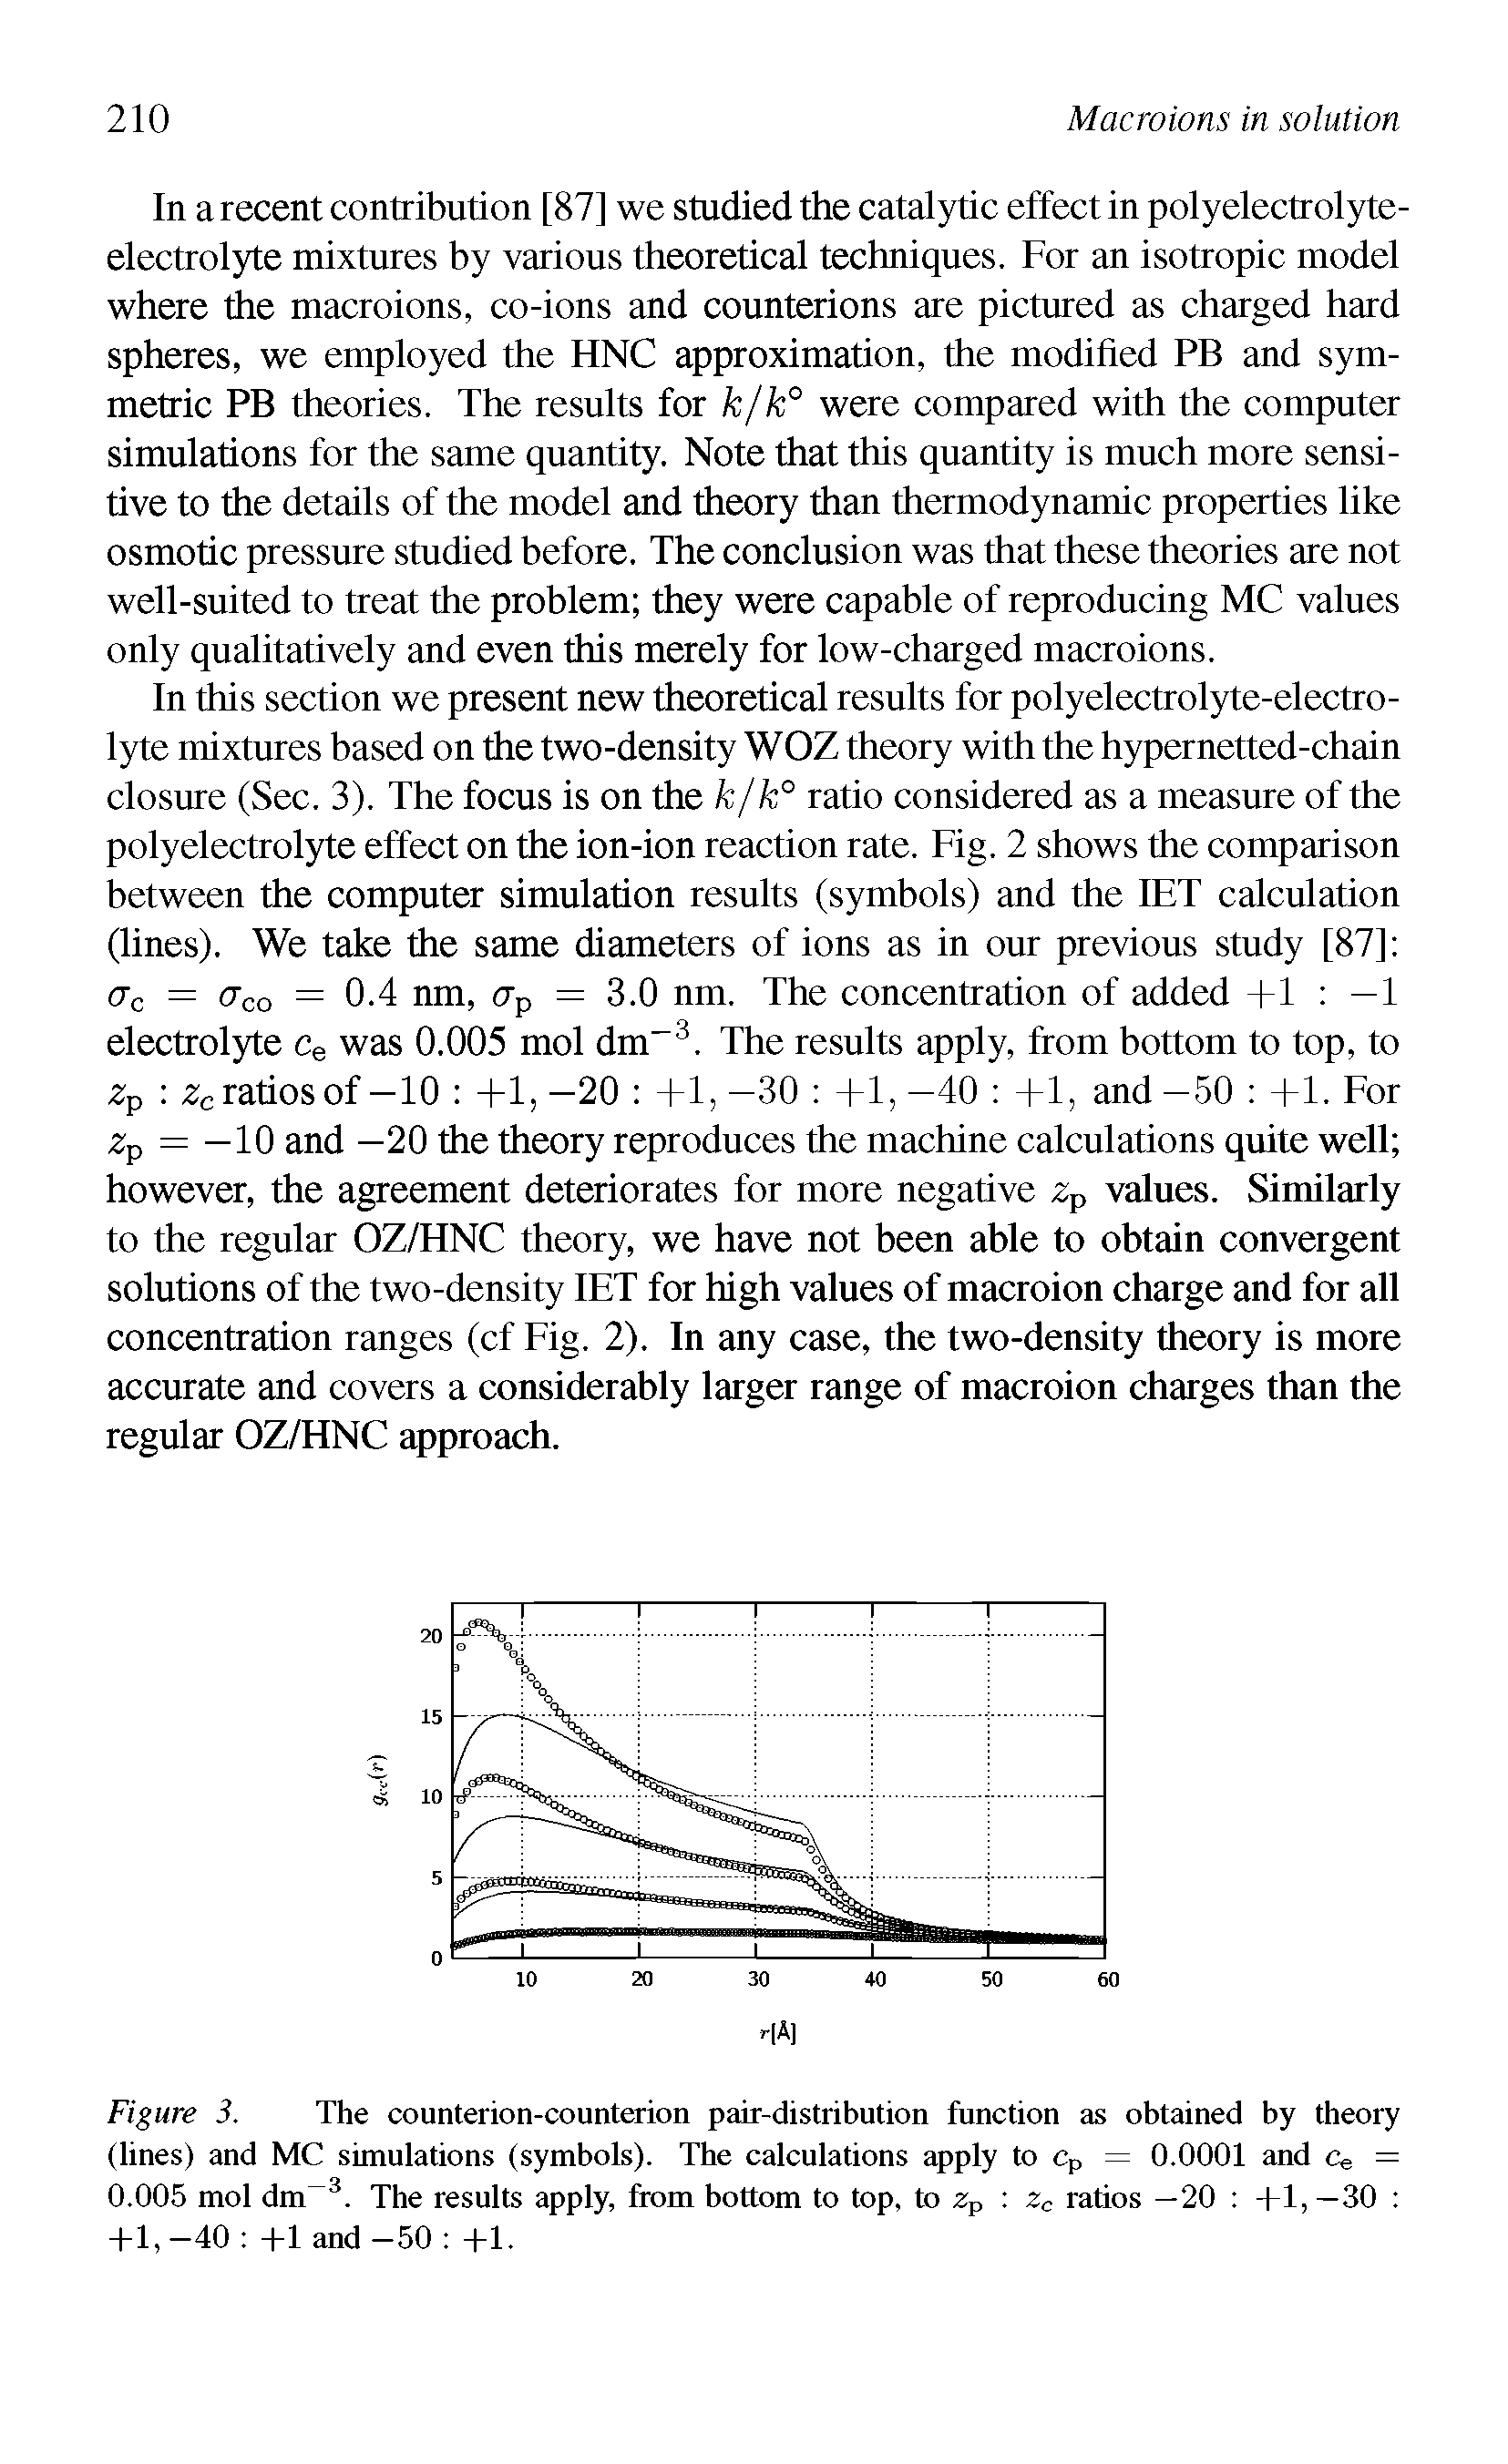 Figure 3. The counterion-counterion pair-distribution function as obtained by theory (lines) and MC simulations (symbols). The calculations apply to cp = 0.0001 and Ce = 0.005 mol dm 3. The results apply, from bottom to top, to zp zc ratios —20 +1, —30 +1,-40 +1 and-50 +1.